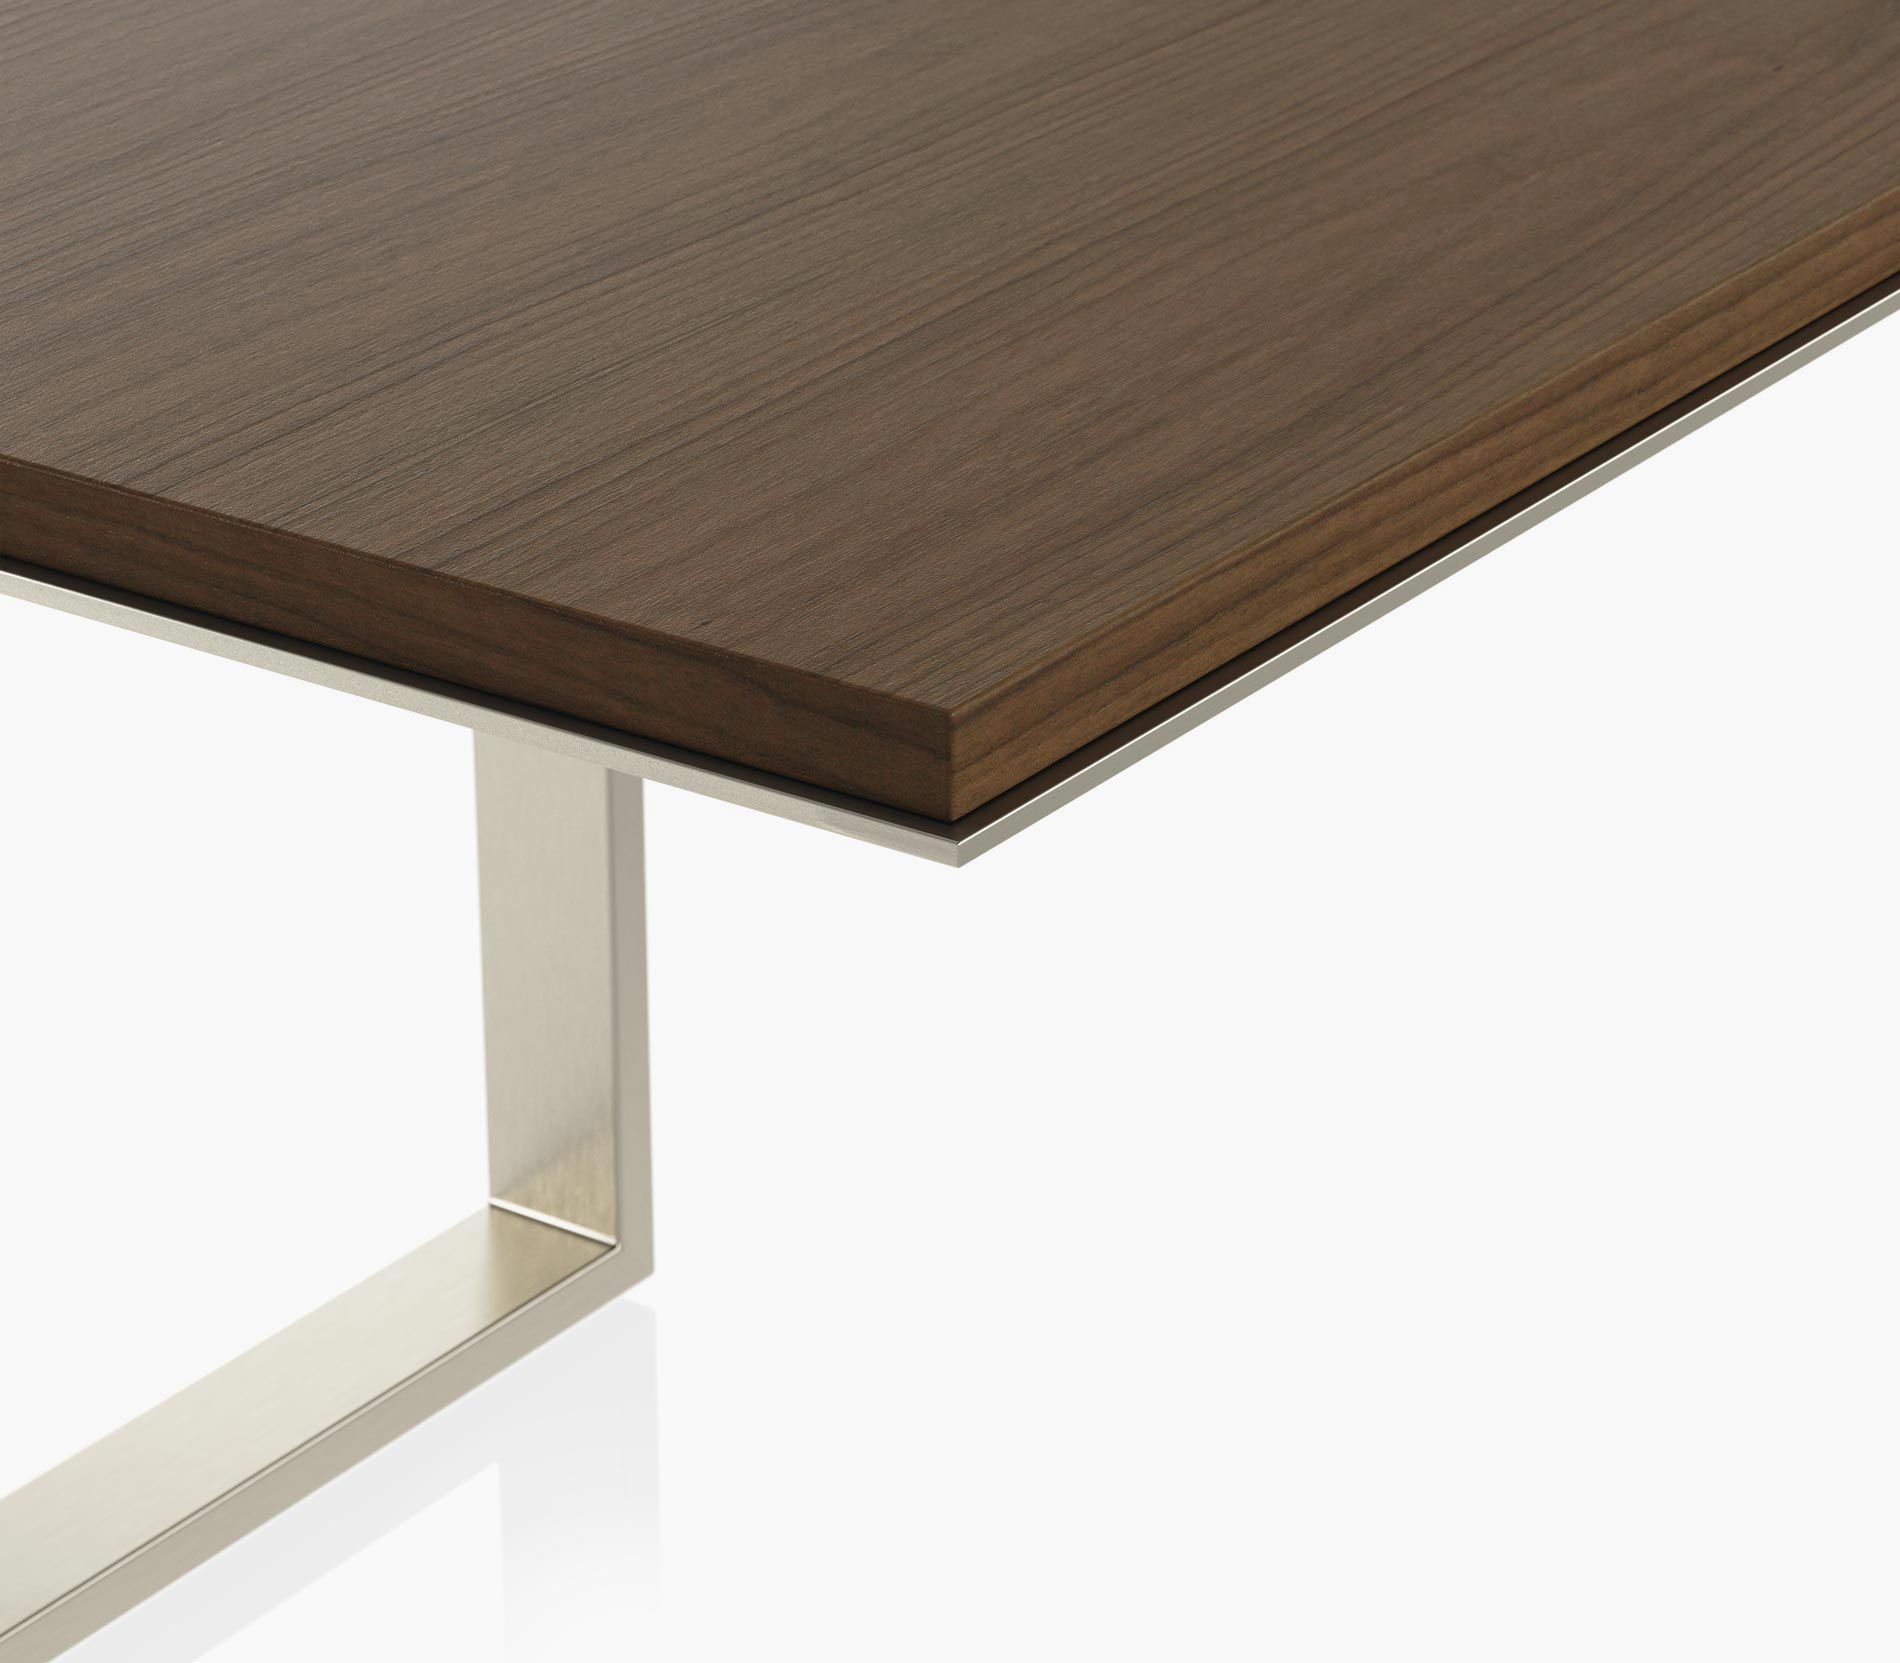 Edge detail on a Highline Conference Table in cashmere flat cut walnut with a satin nickel edge and base